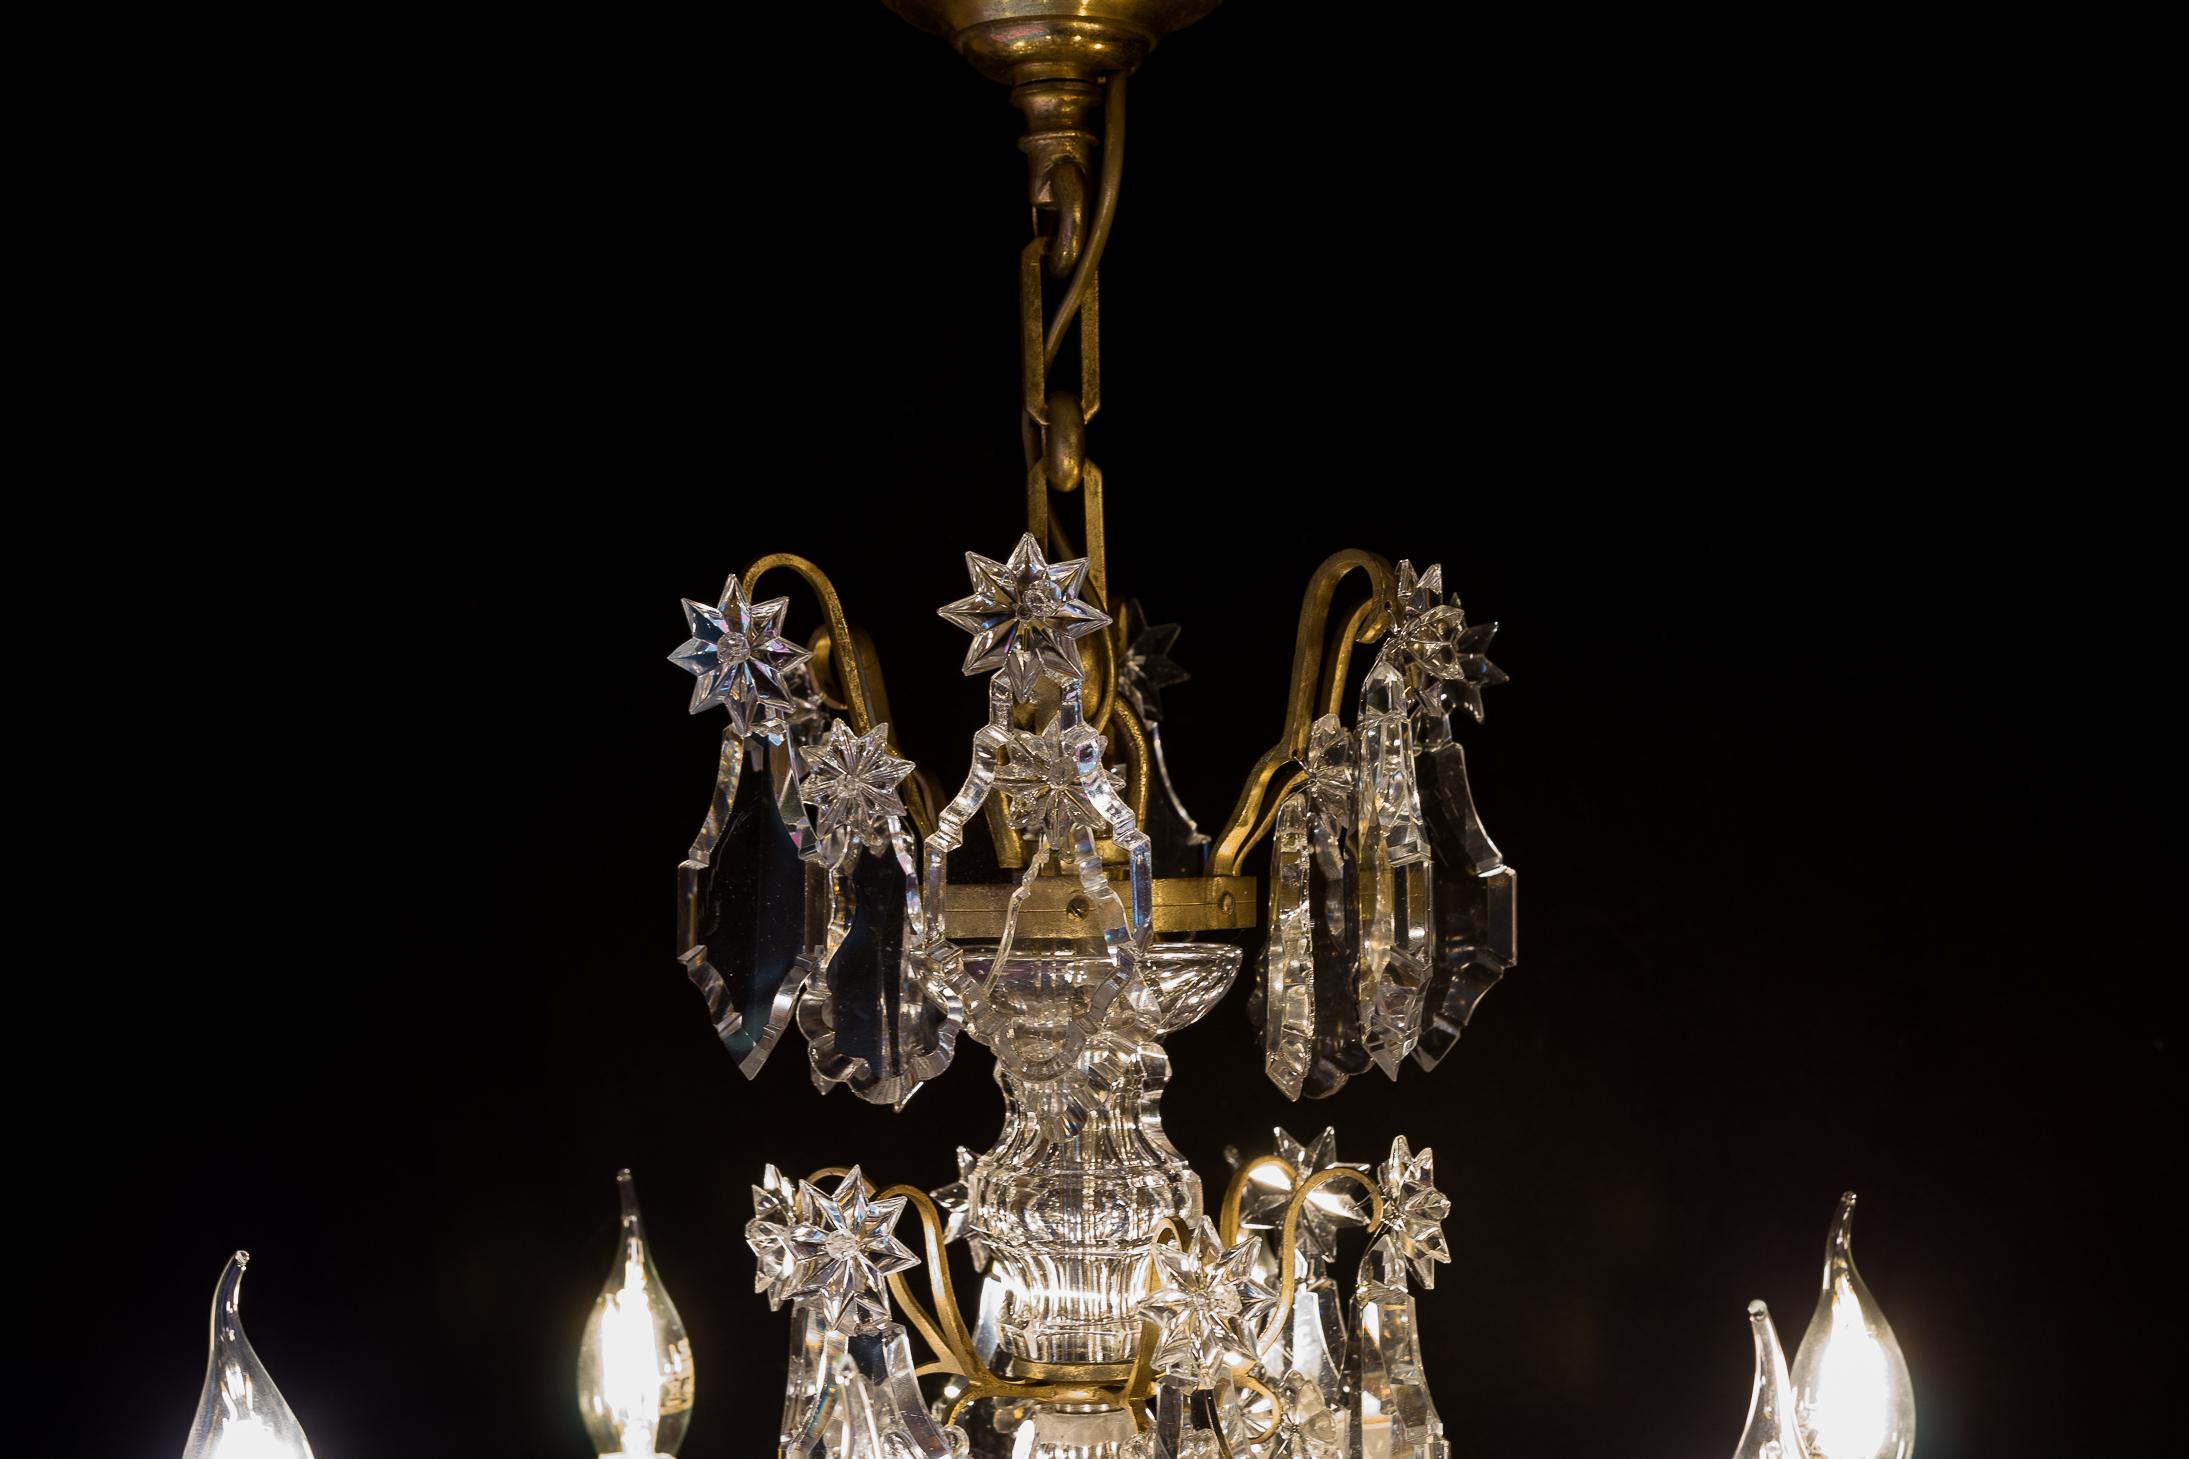 19th Century French Louis XVI Style Gilt-Bronze and Baccarat Crystal Chandelier, circa 1880